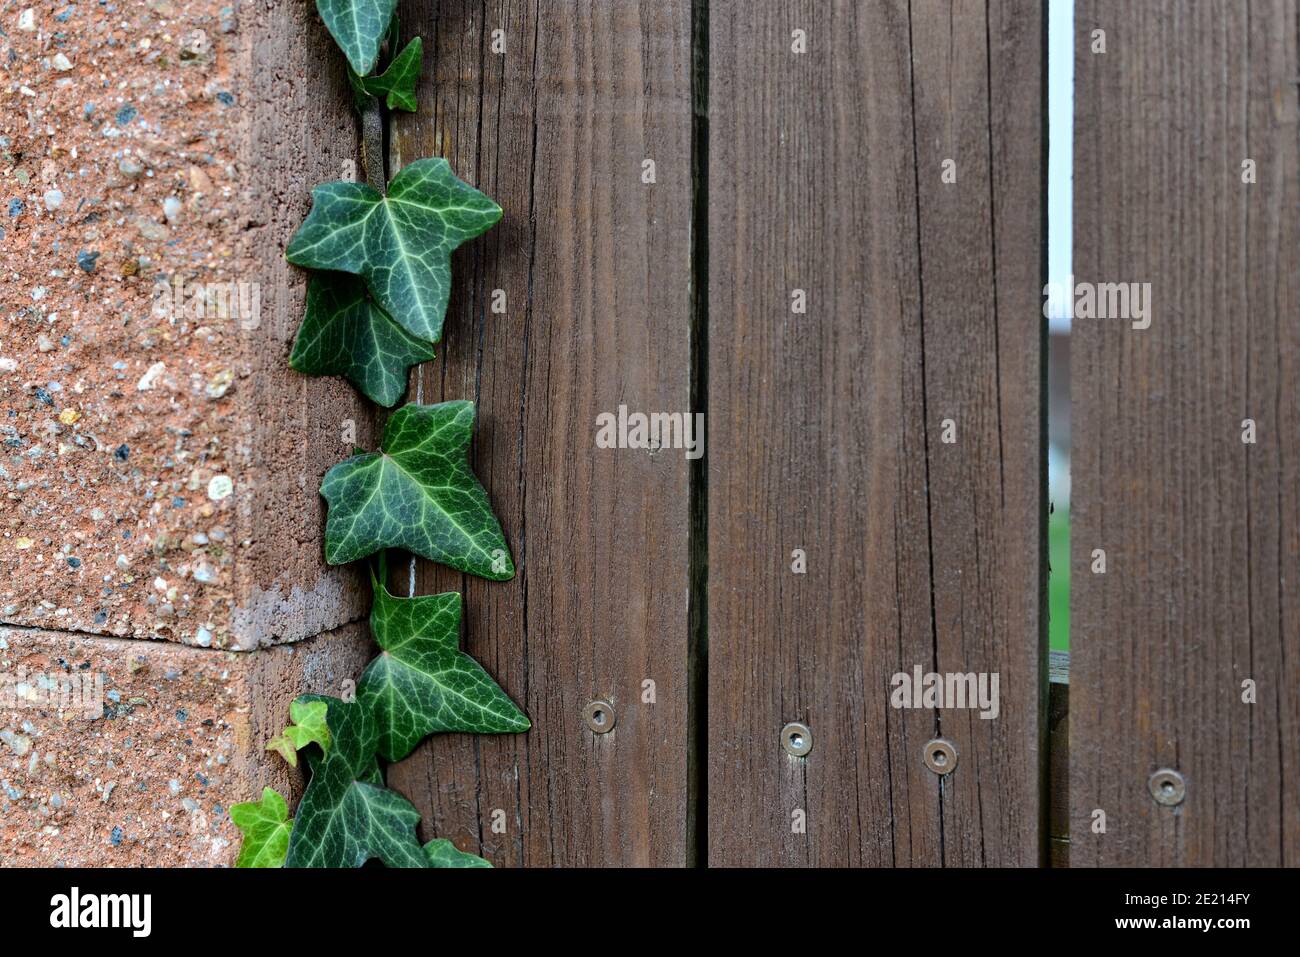 Ivy leaves growing on a wood-concrete fence. Green leaves of a climbing plant. Wooden fence planks. Pink concrete pillar. Creeper ivy. Hedera helix. Stock Photo